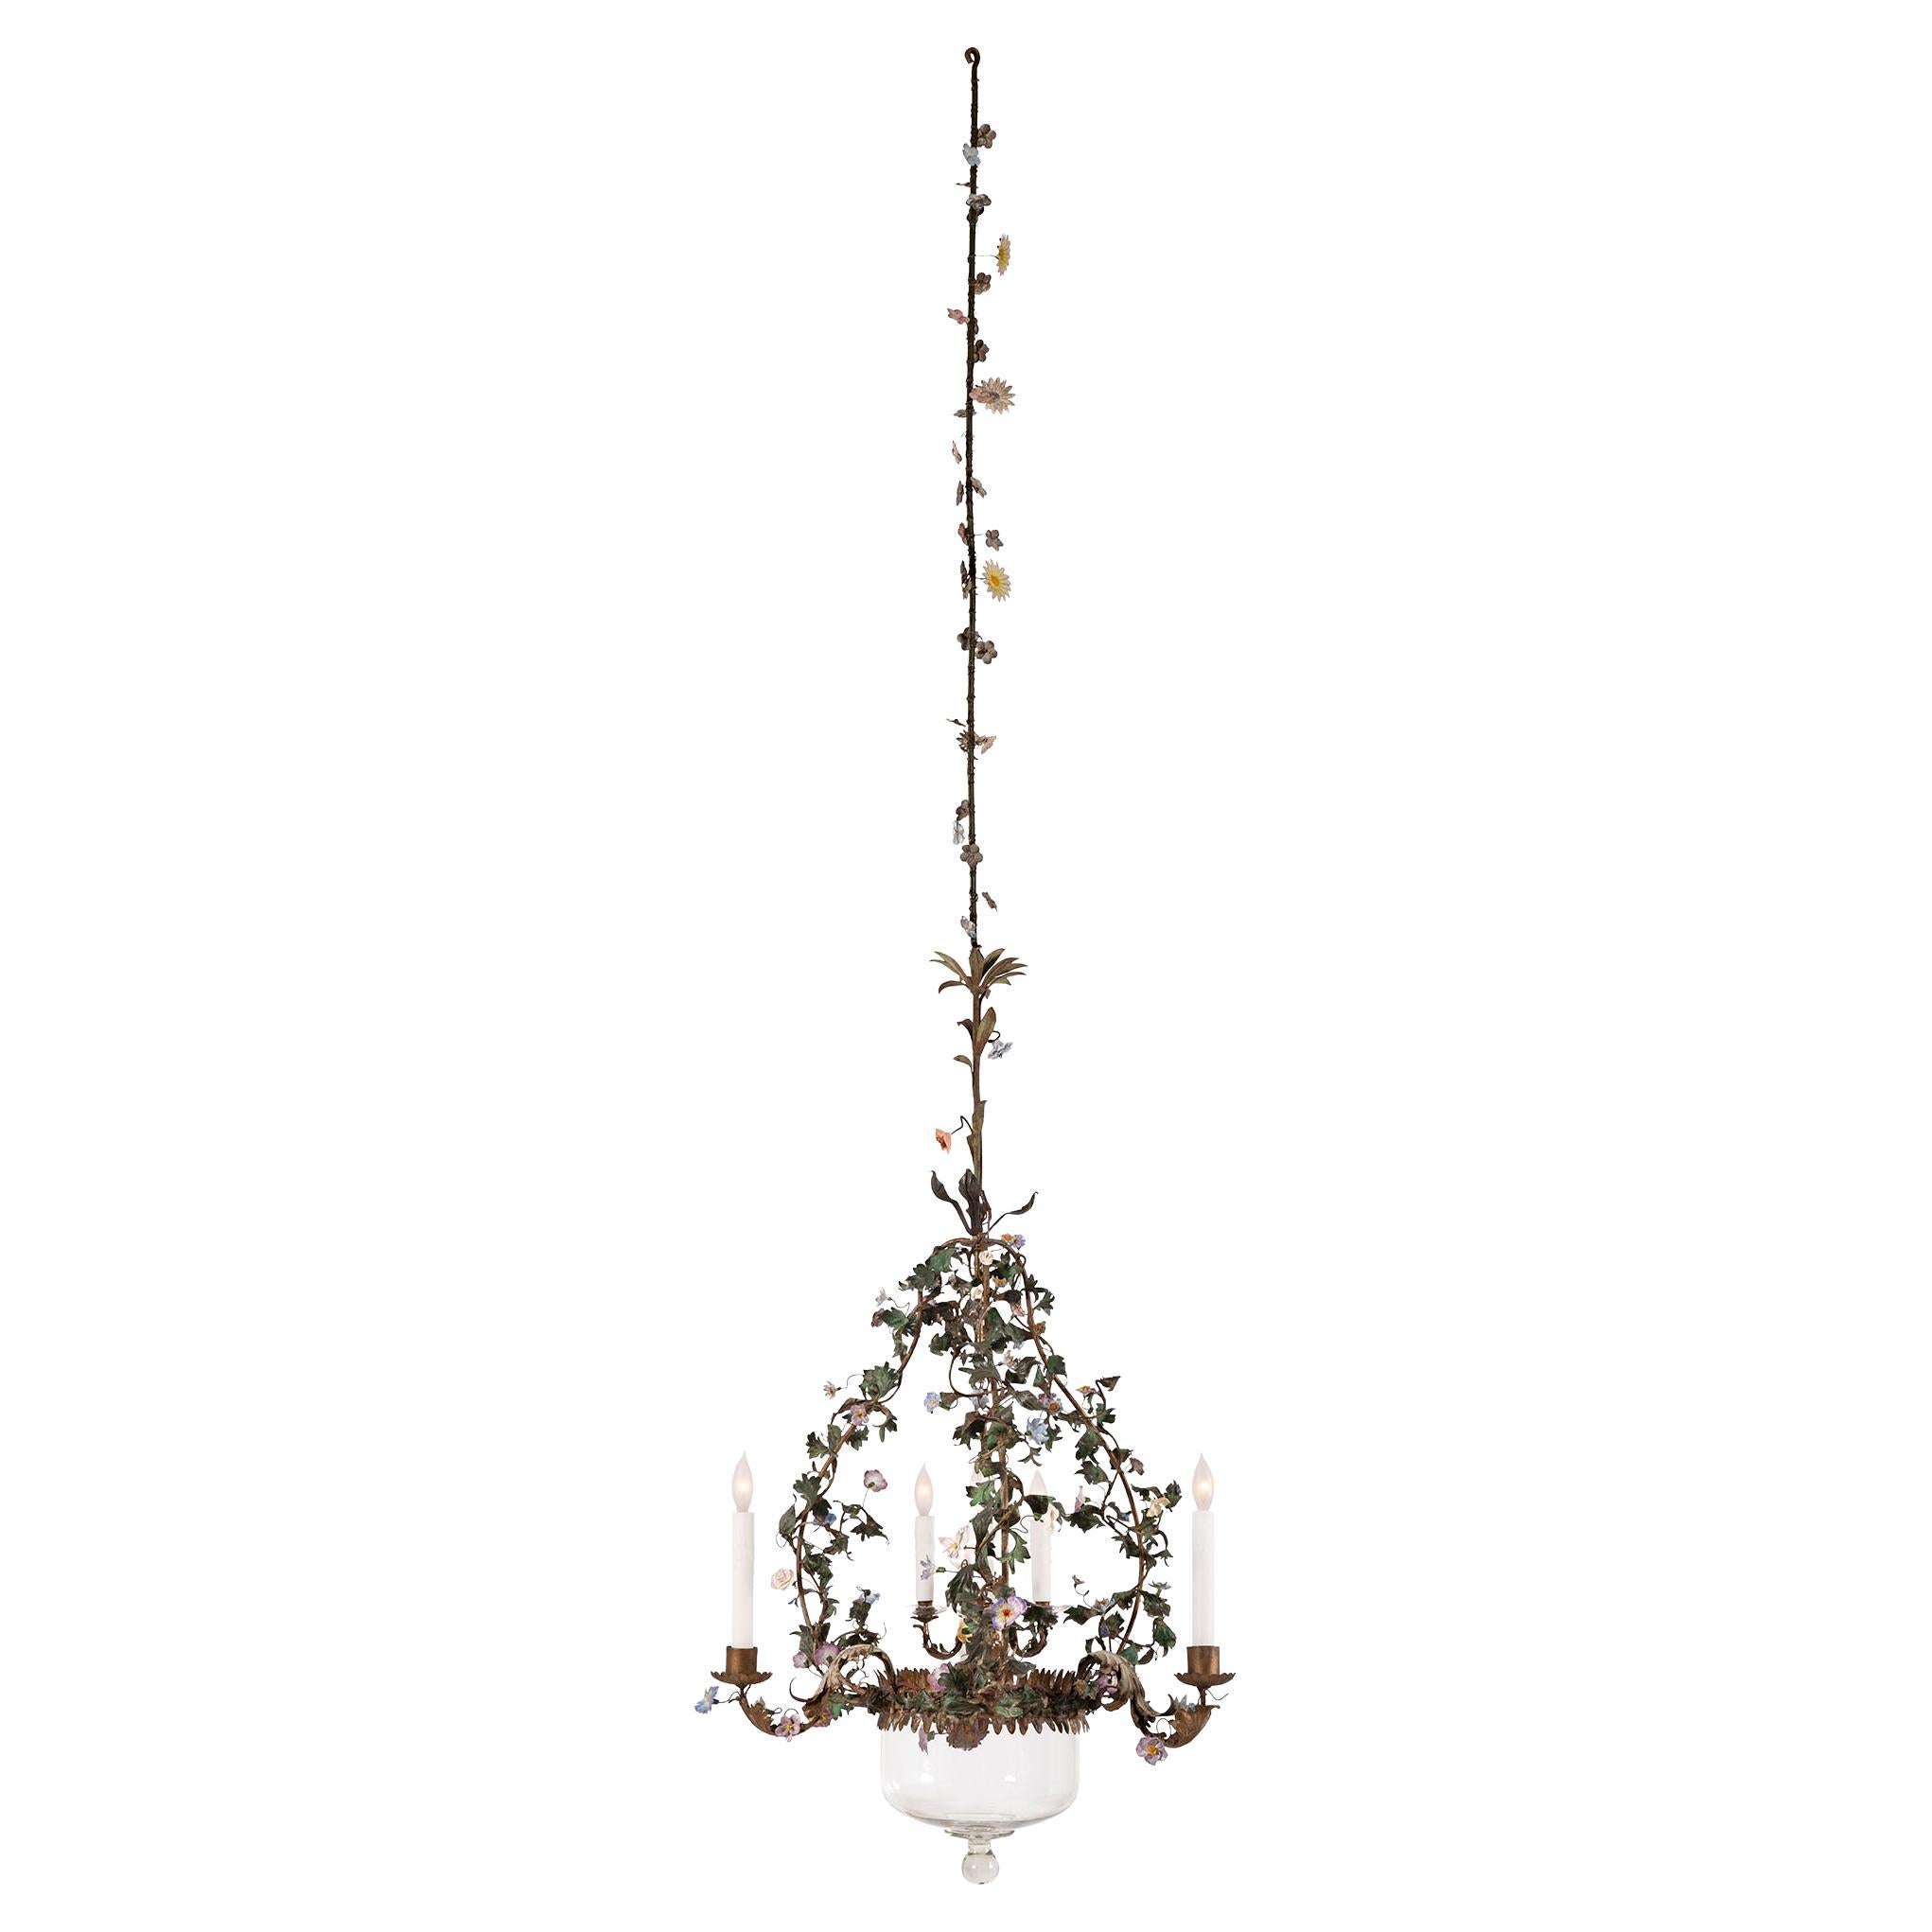 Italian 19th Century Painted and Gilt Metal Chandelier For Sale